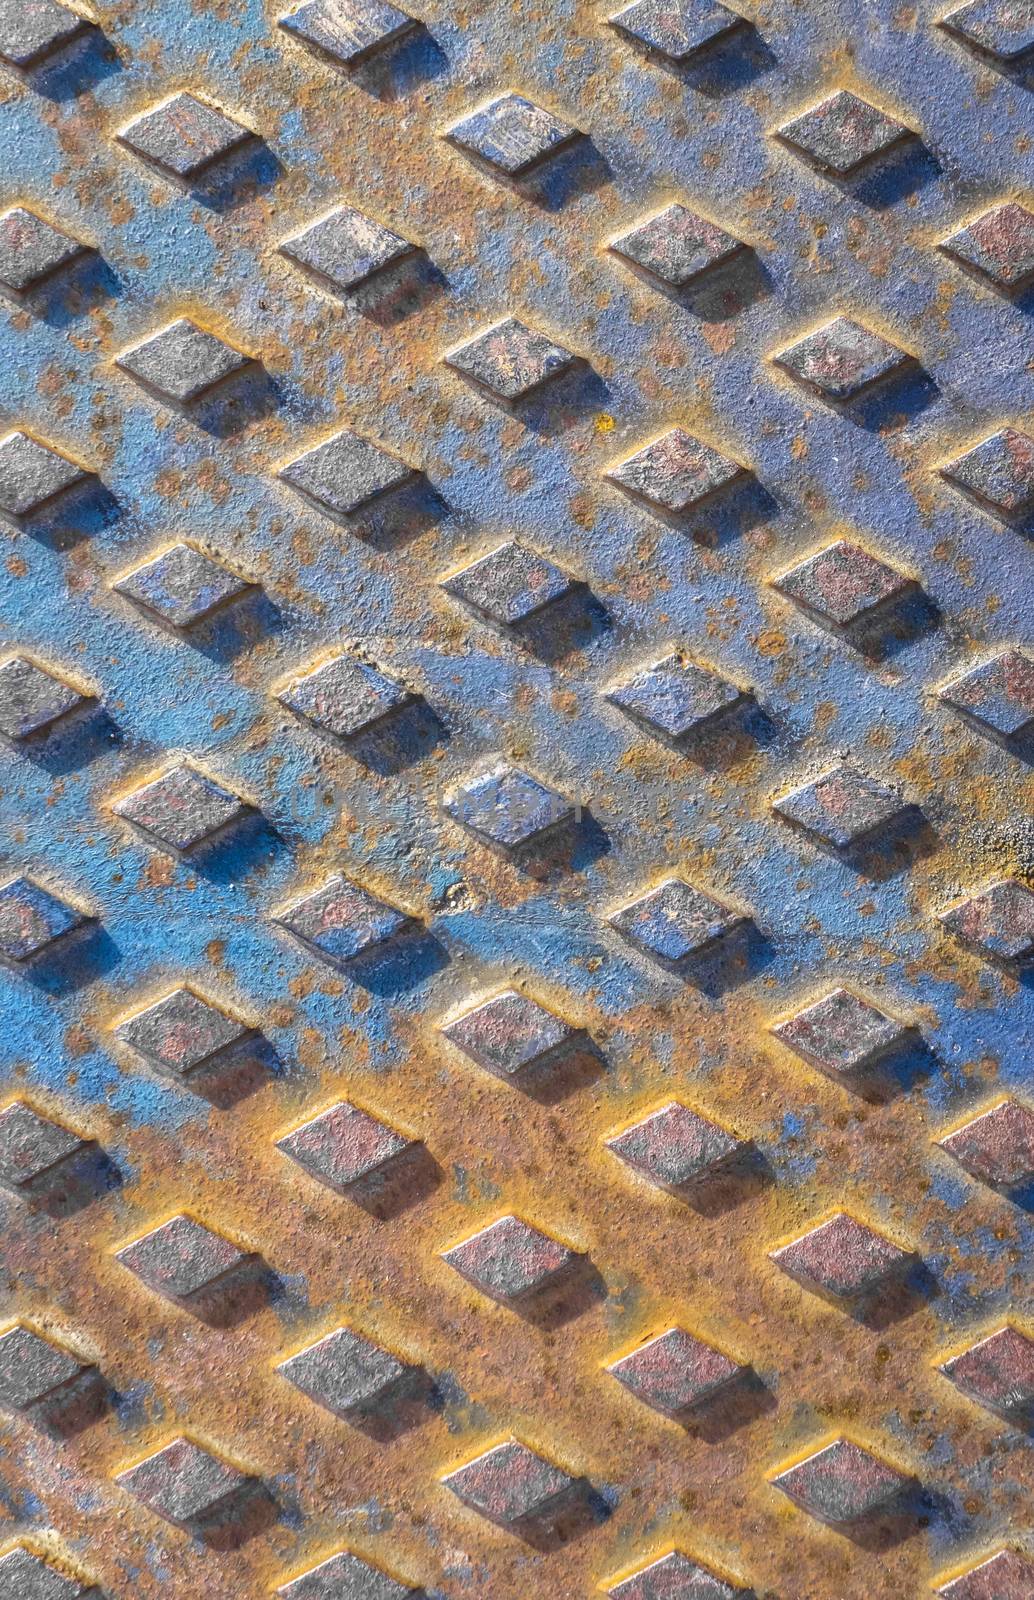 Old rusty drain cover background with diamond pattern. Orange and blue rusted manhole texture with square pattern, background macro.